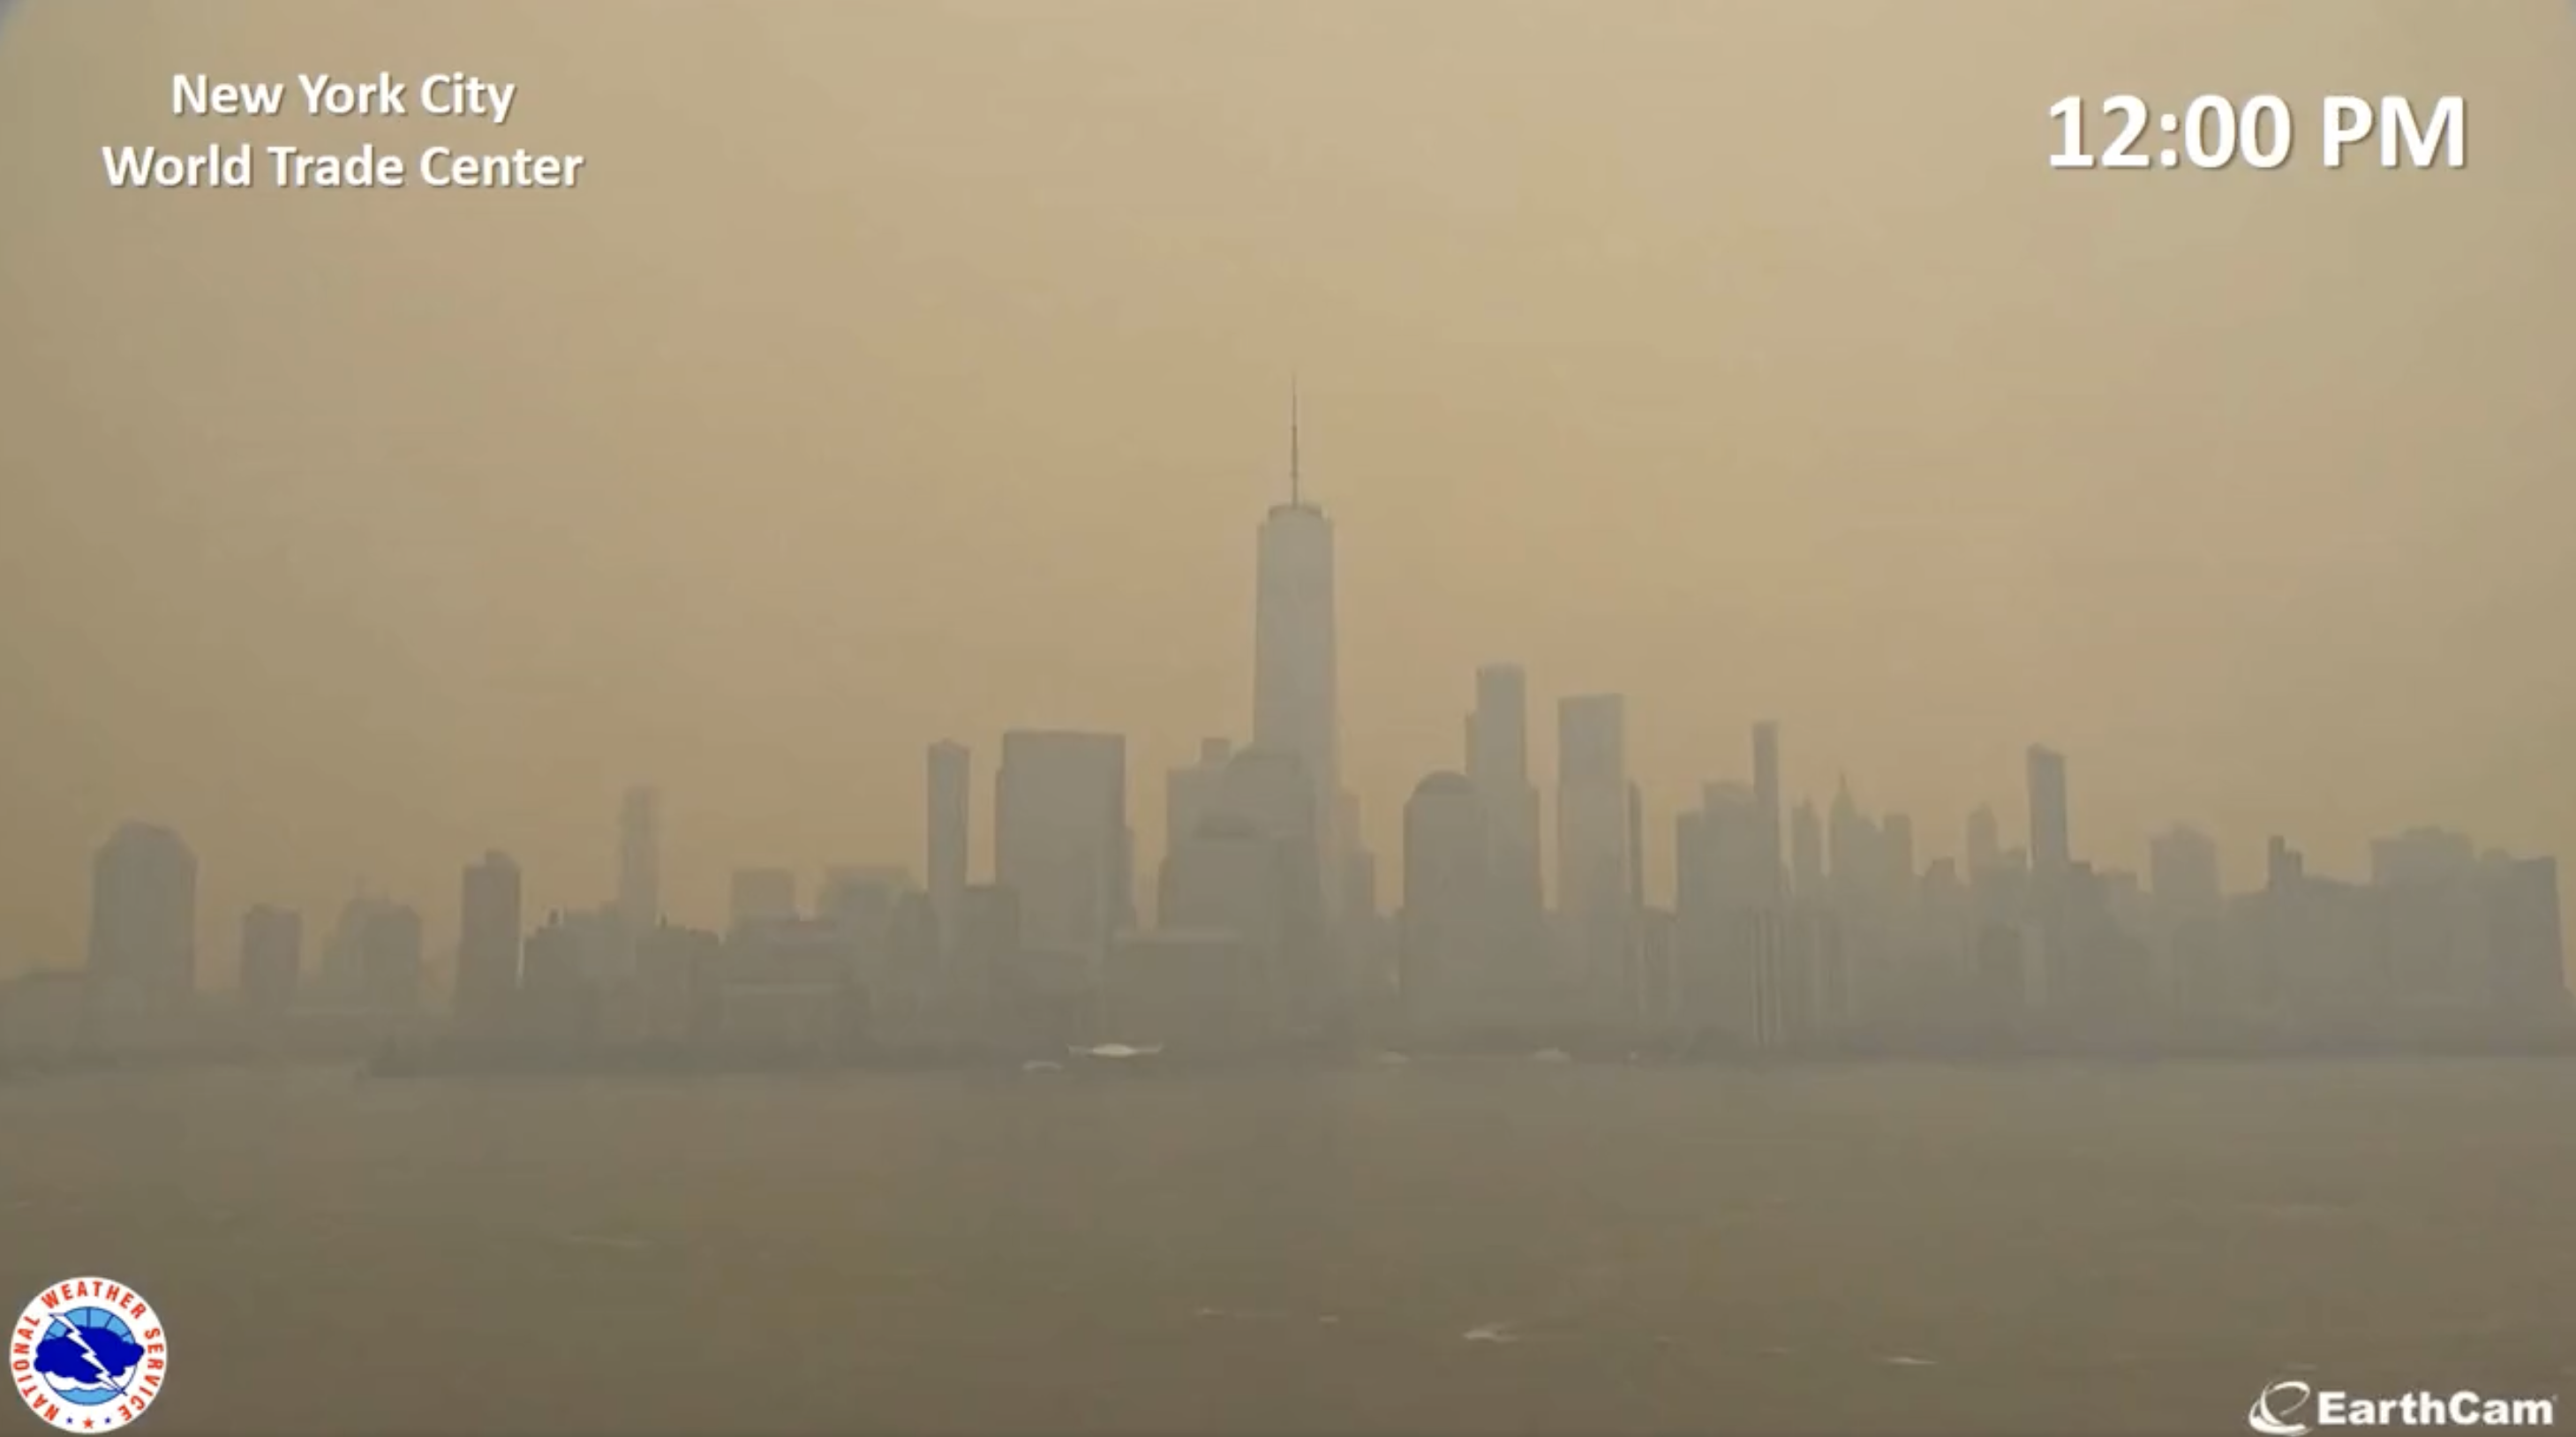 View of the downtown Manhattan skyline at 12 pm, with the sky now a light orange